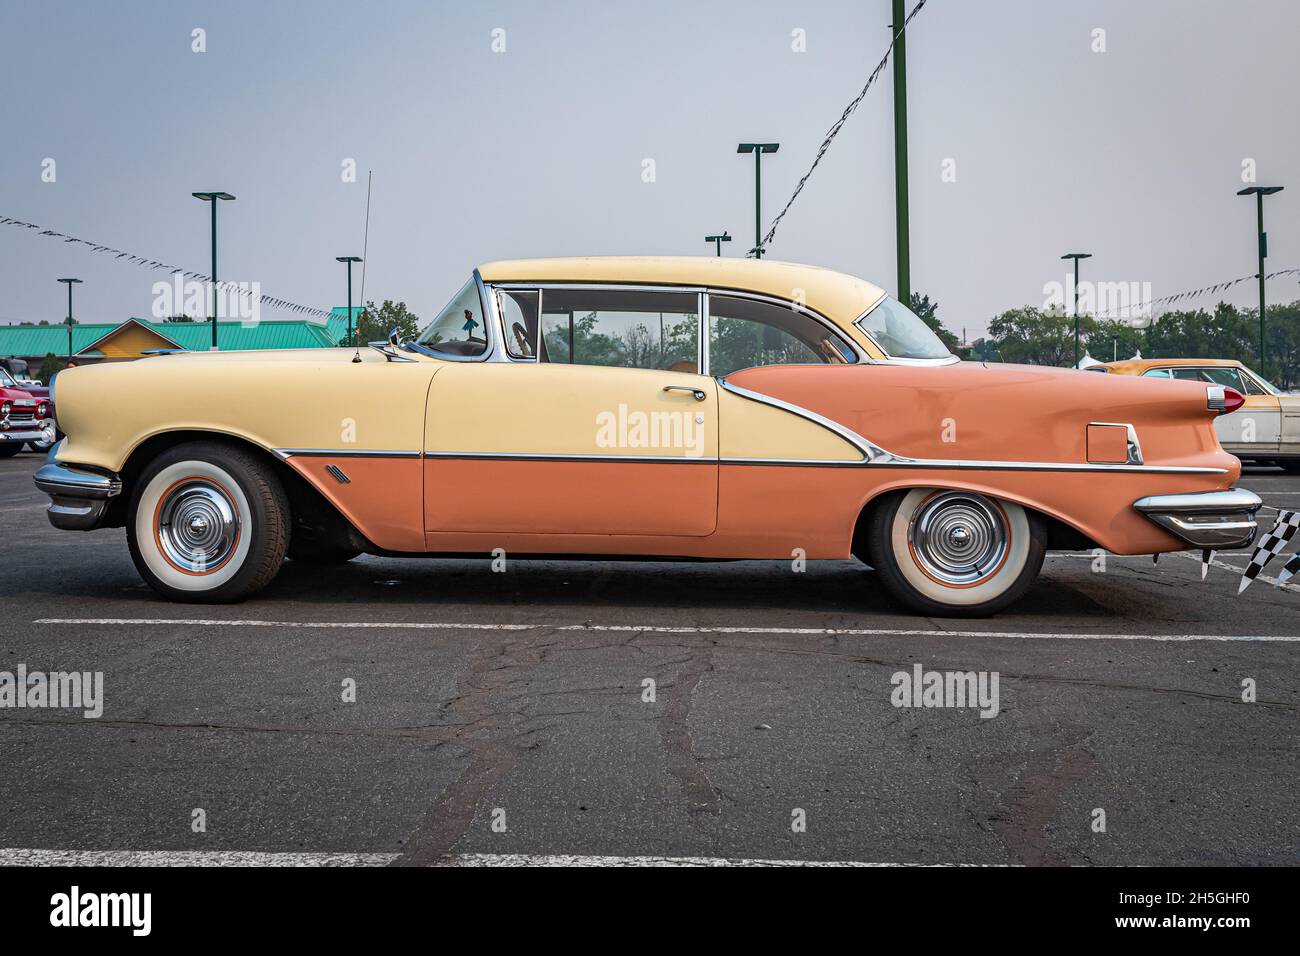 Reno, NV - August 6, 2021: 1956 Oldsmobile 88 Hardtop Coupe at a local car show. Stock Photo